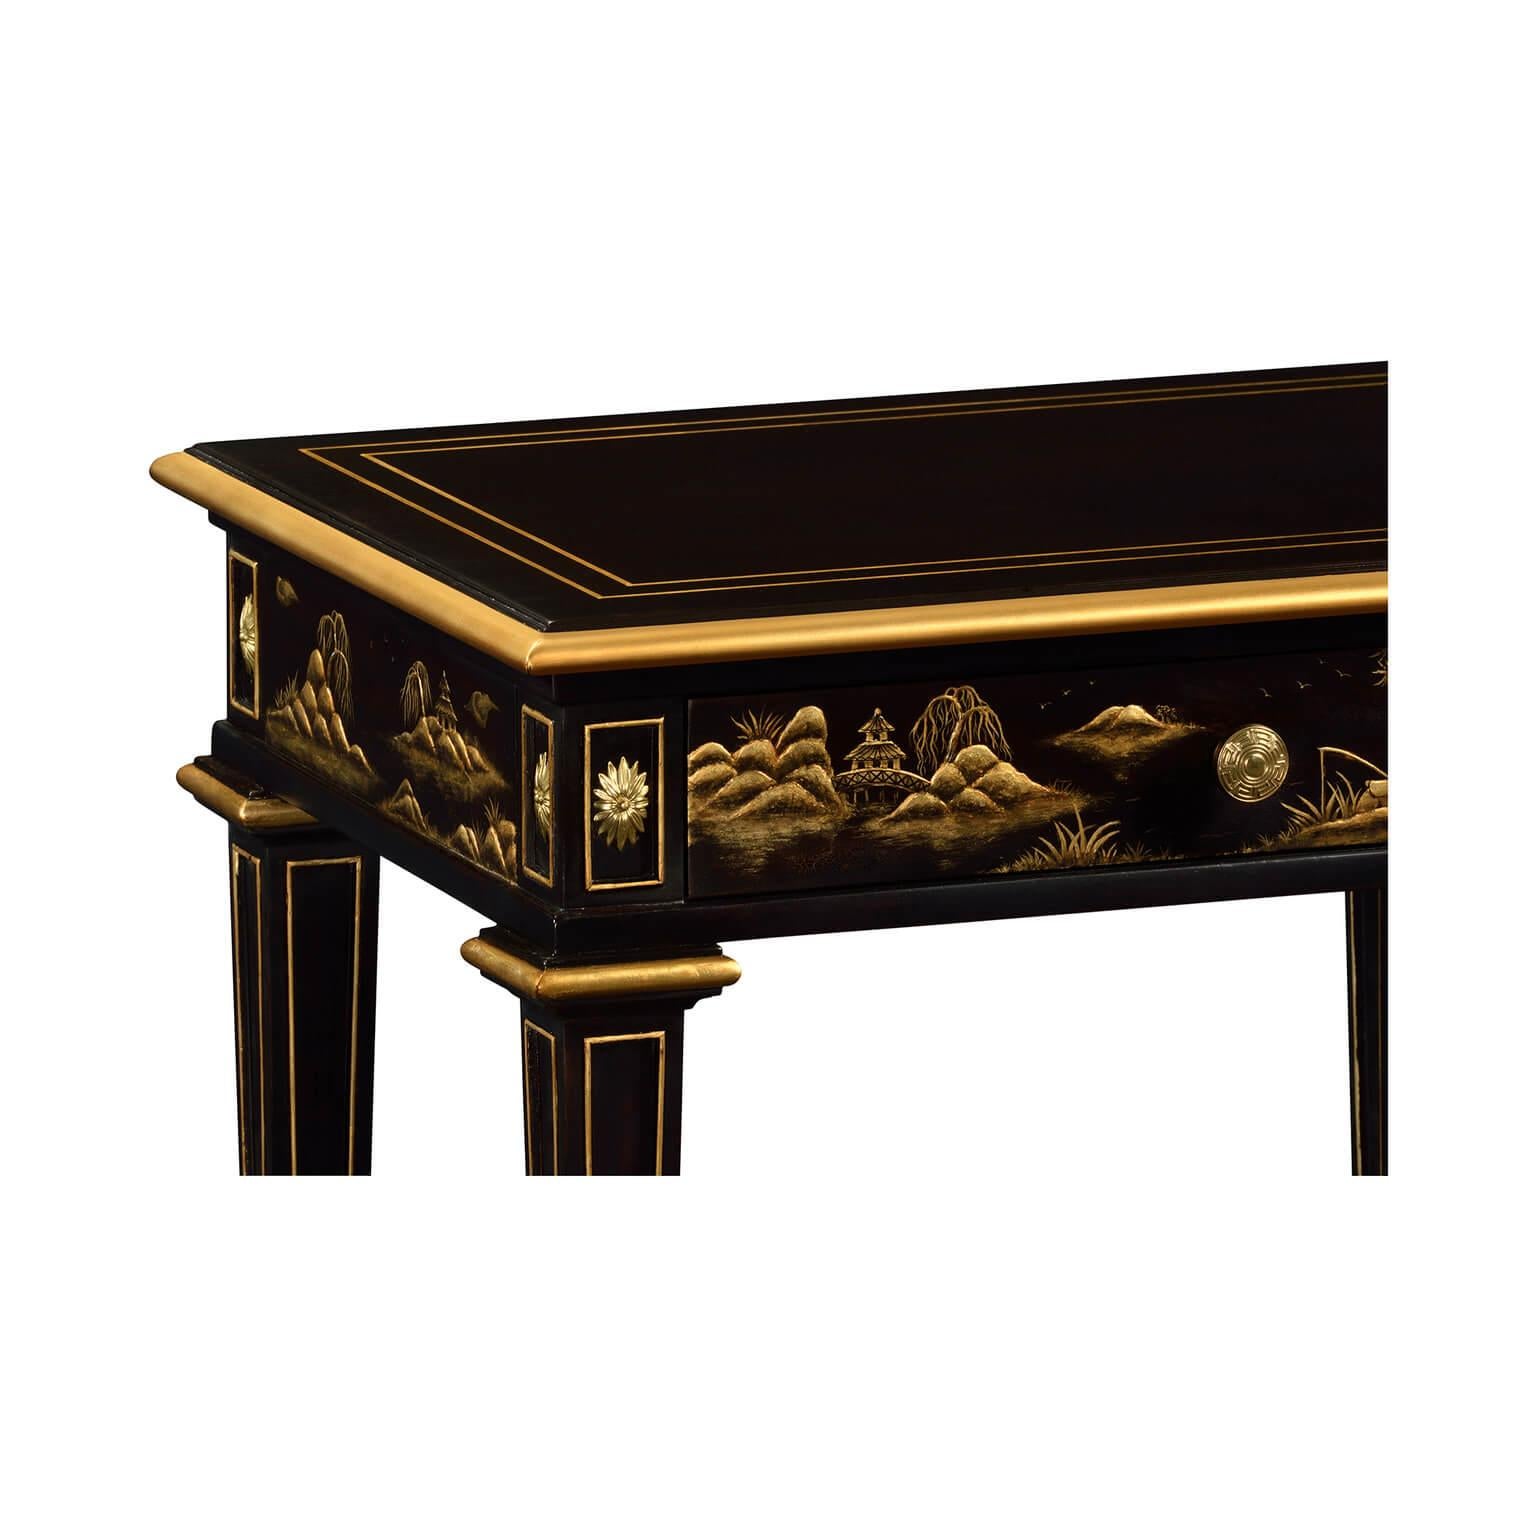 A pair of George III style lacquered and gilt chinoiserie decorated one drawer side table. With molded and gilded edge, single drawer on square tapered legs.

Dimensions: 24